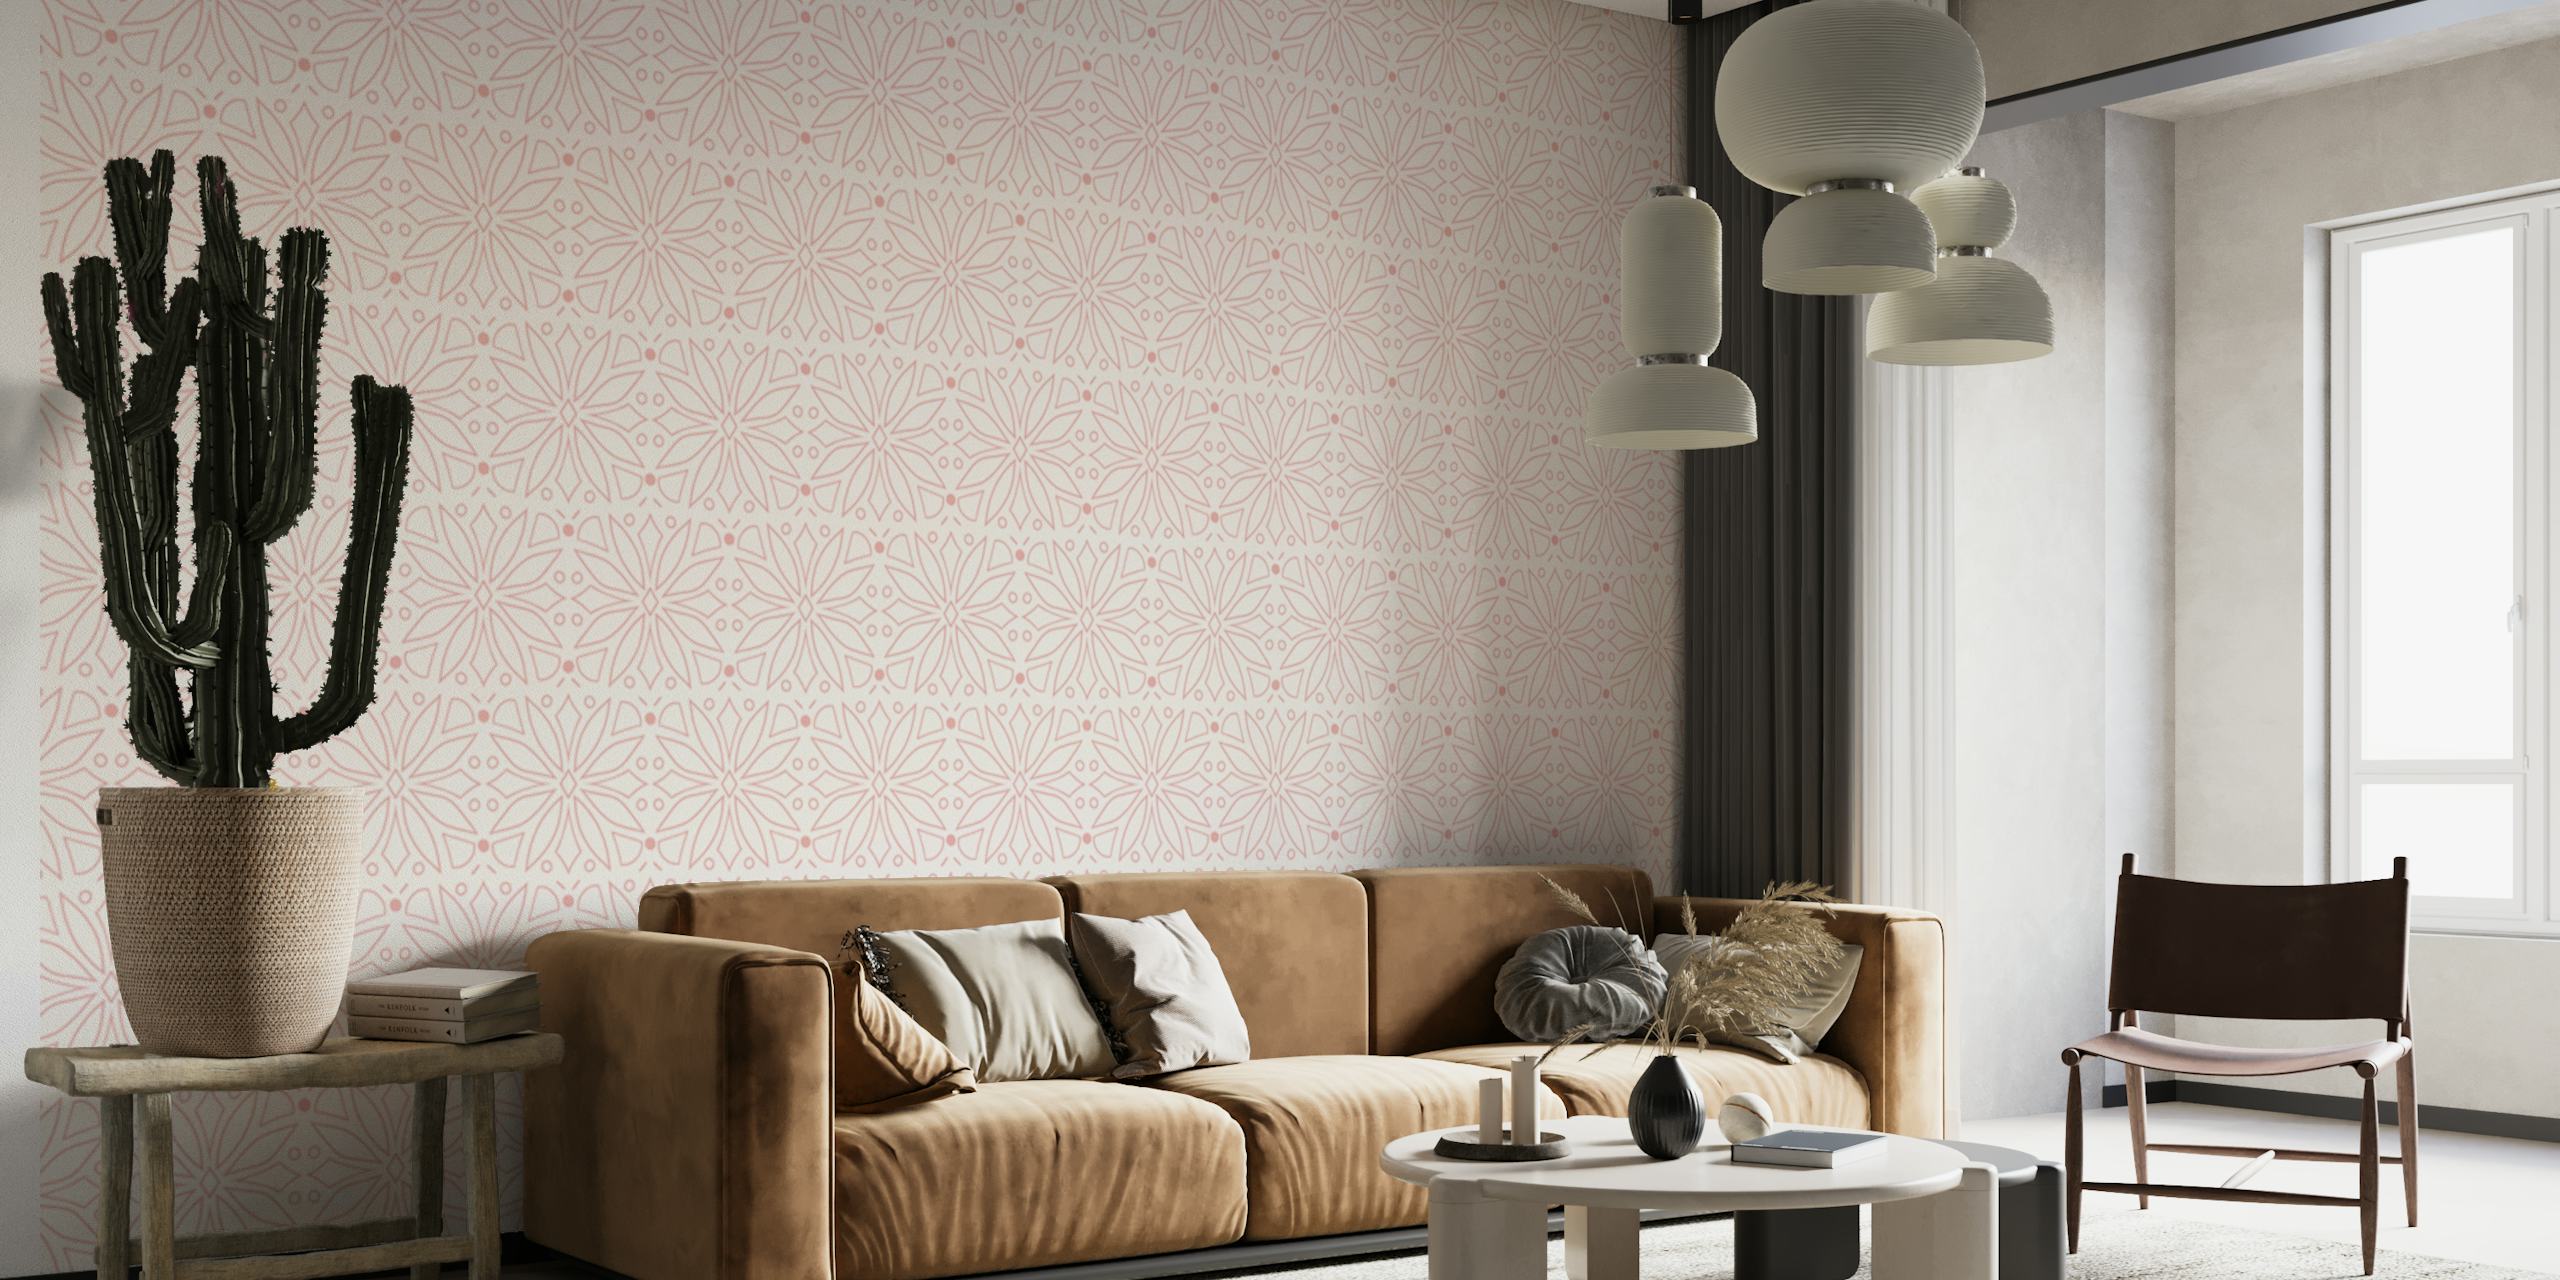 Geo Flower_soft pink wall mural with subtle geometric floral patterns